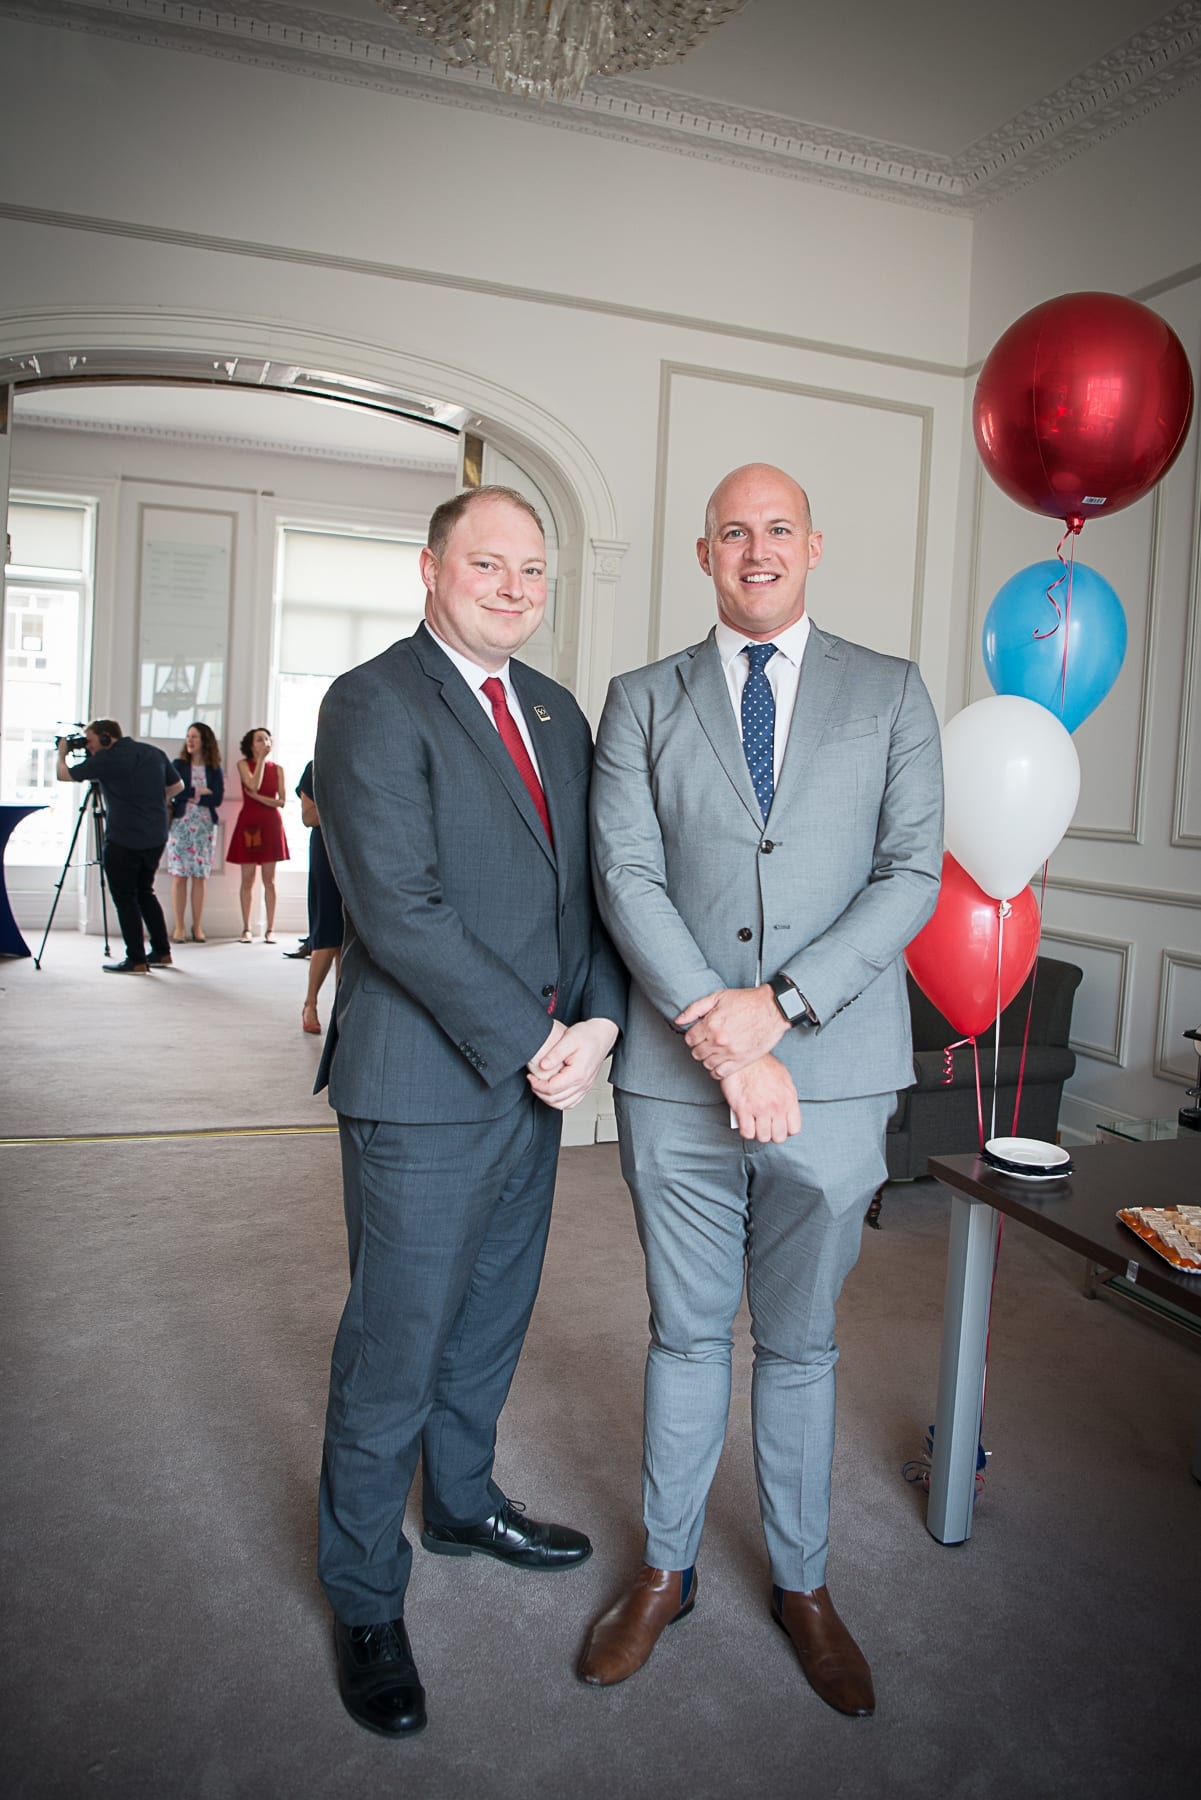 no repro fee- 
From Left to Right:  French Embassy Event which took place on the 18th June in the Limerick Chamber Boardroom:  Cyril Caffan - Castletroy Park Hotel, James Griffin - So Hotels. 
Photo by Morning Star Photography